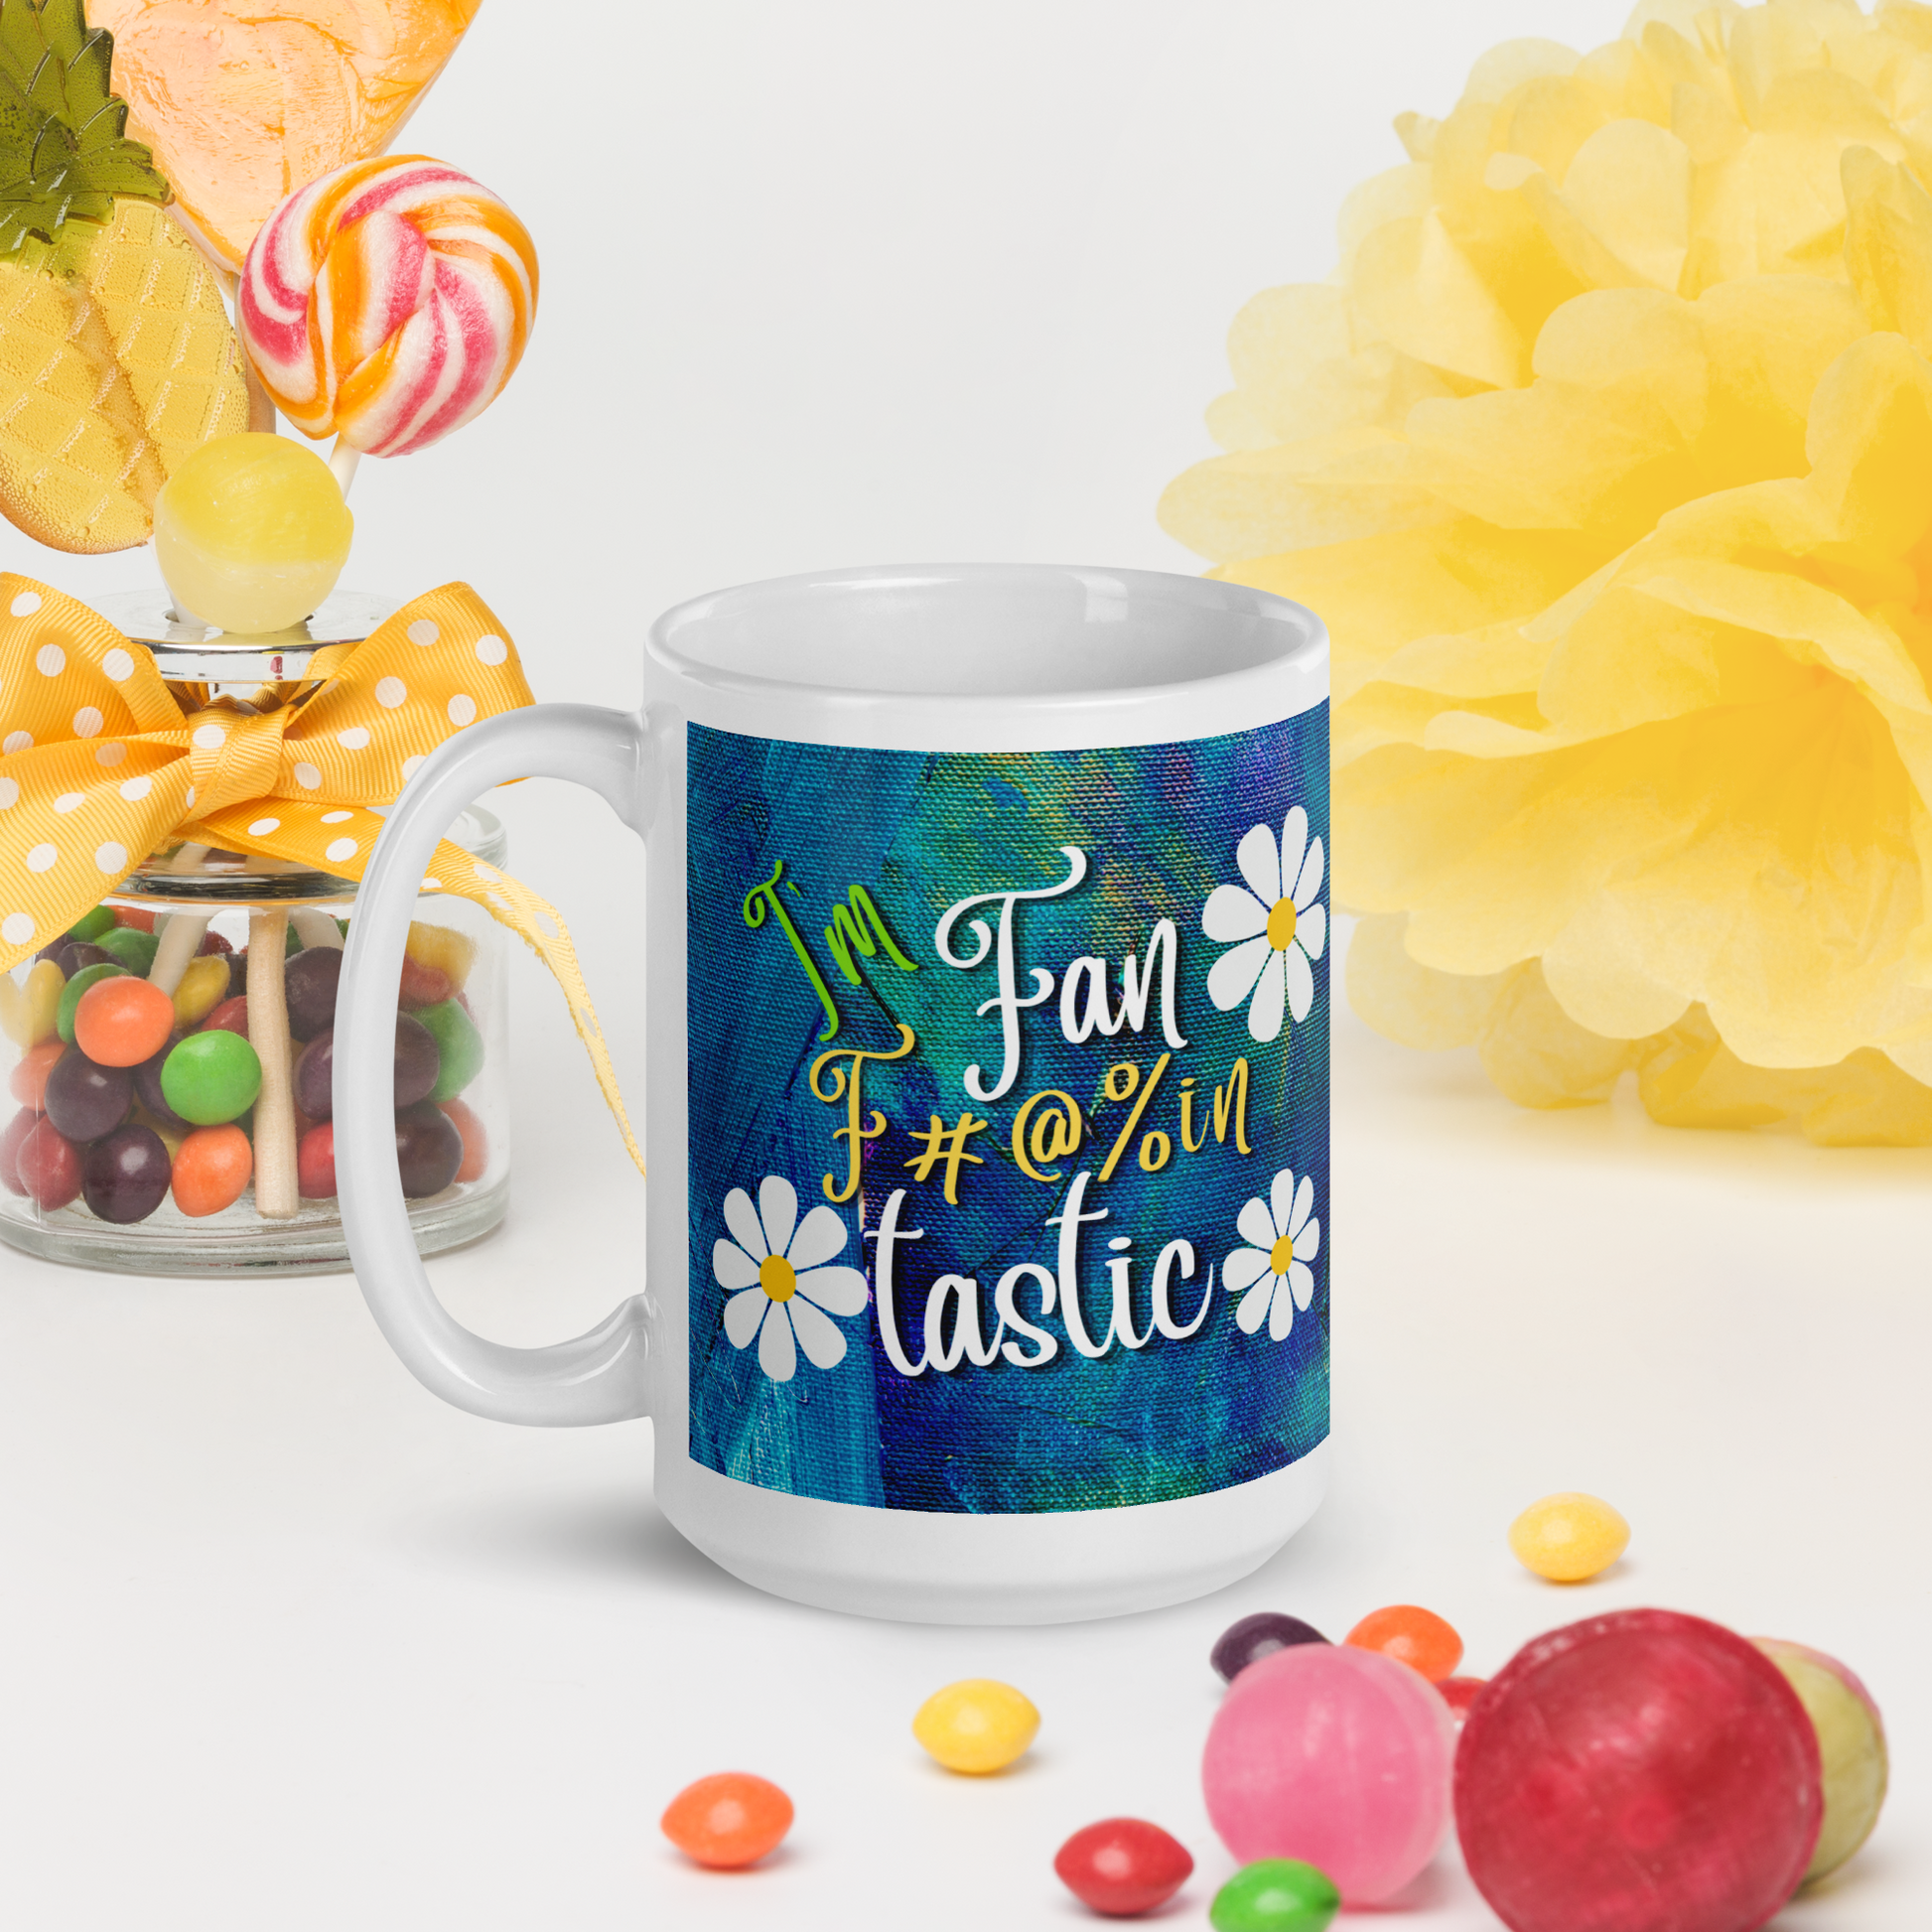 White glossy mug with blue and green textured background with the words I'm fan F#@% in Tastic. made for right or left handed people.